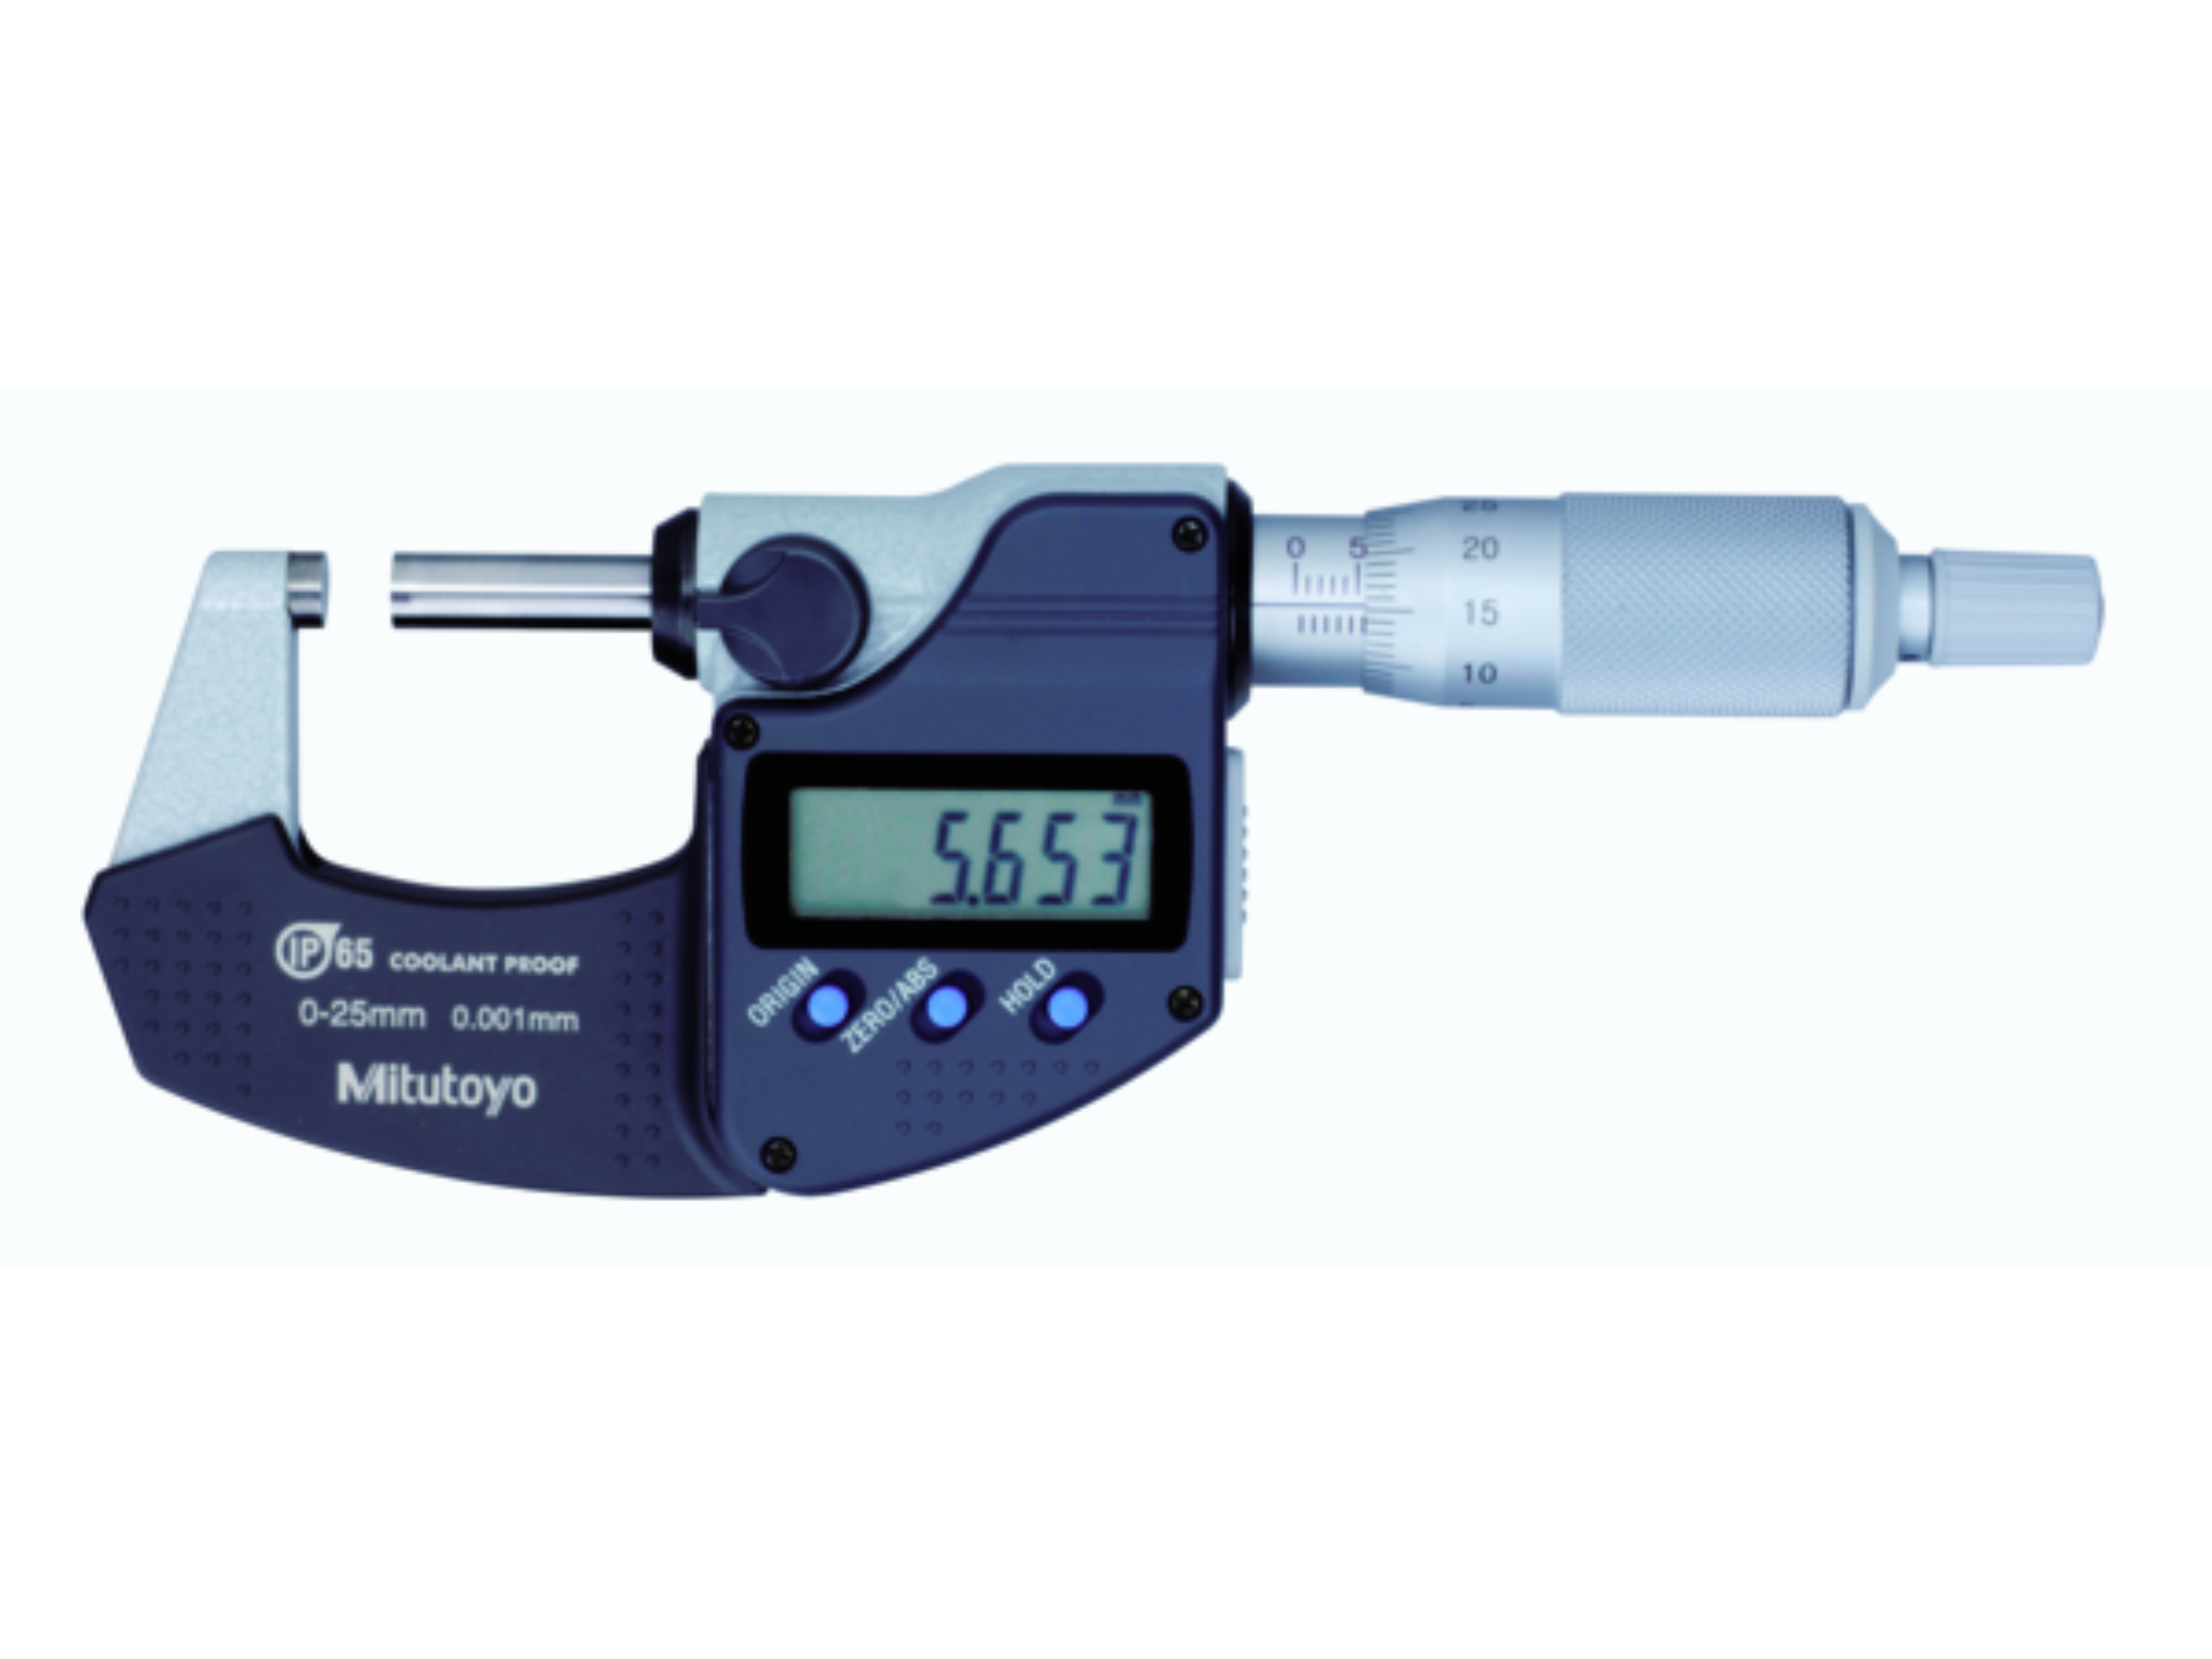 Metric Digimatic Micrometer 0-25mm, IP65, Ratchet Stop, With Output, 293-230-30